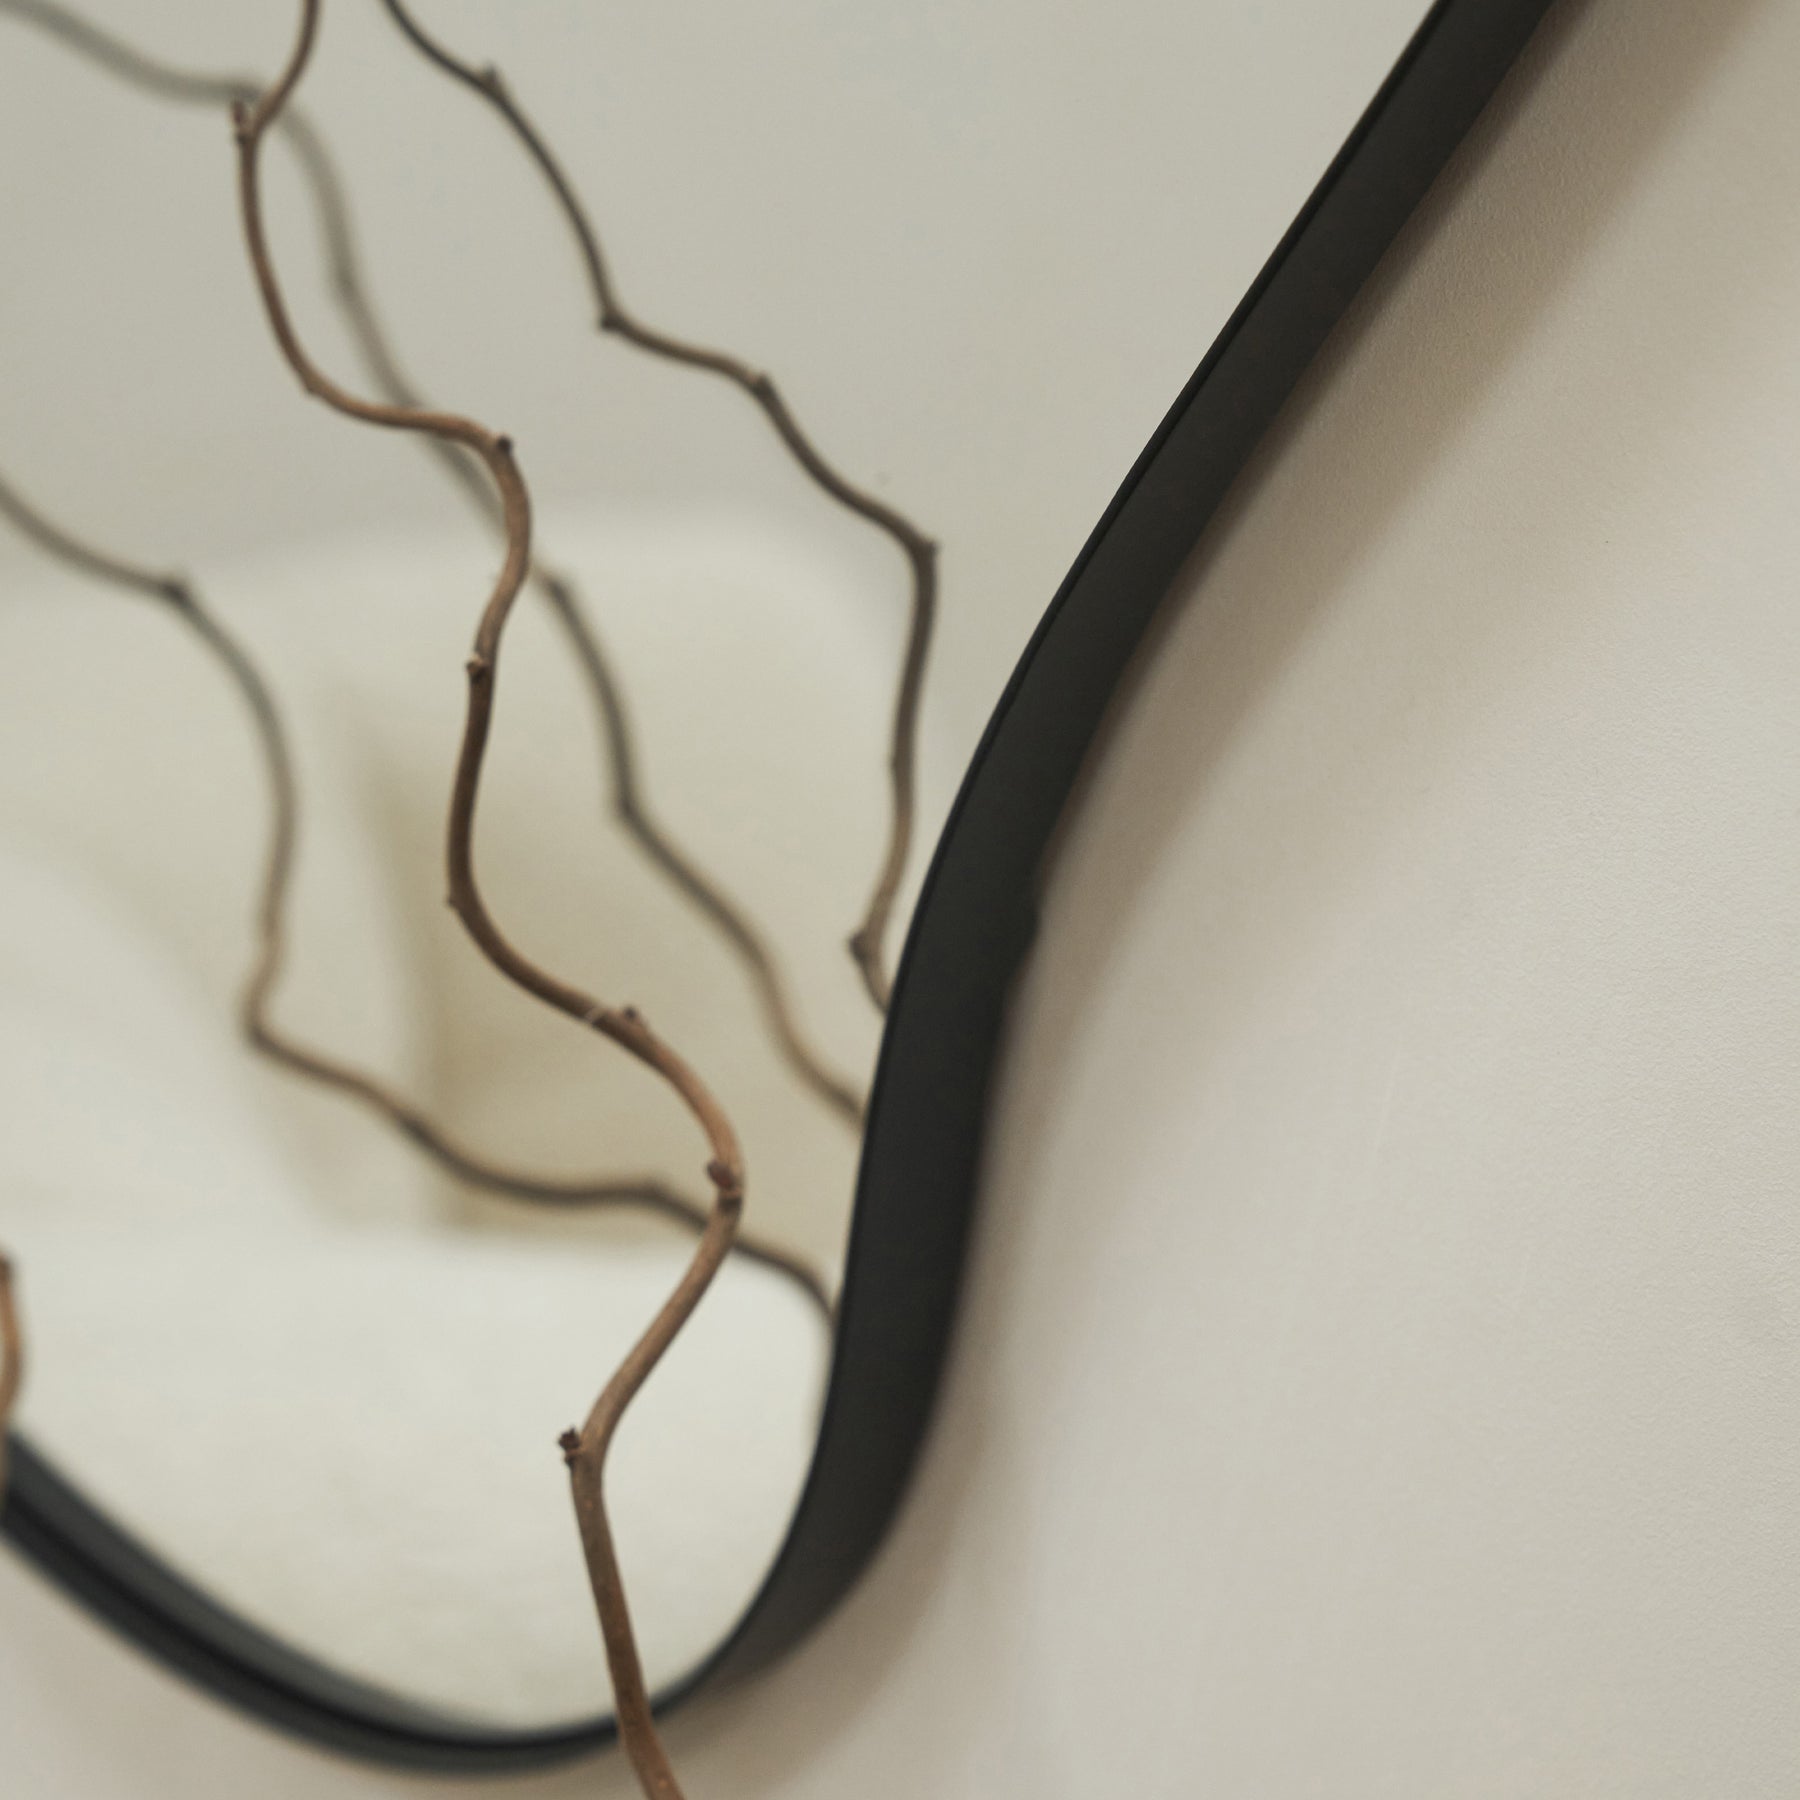 Detail shot of branches collaging with Black Metal Pond Shaped Irregular Wall Mirror